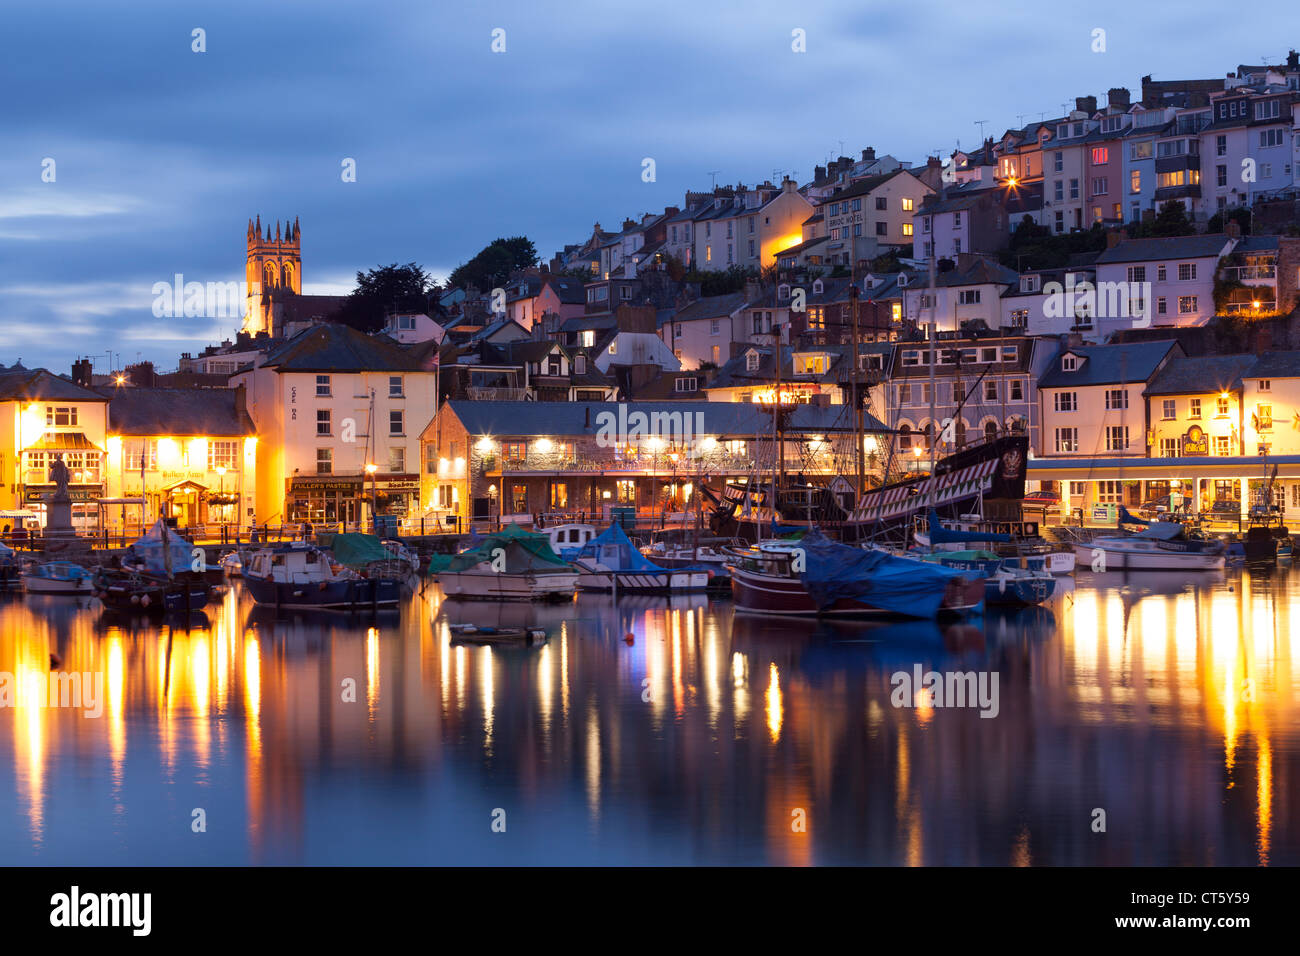 Brixham harbour at dusk, showing the Golden Hind and other small boats, with reflections of streetlights in the water. Stock Photo